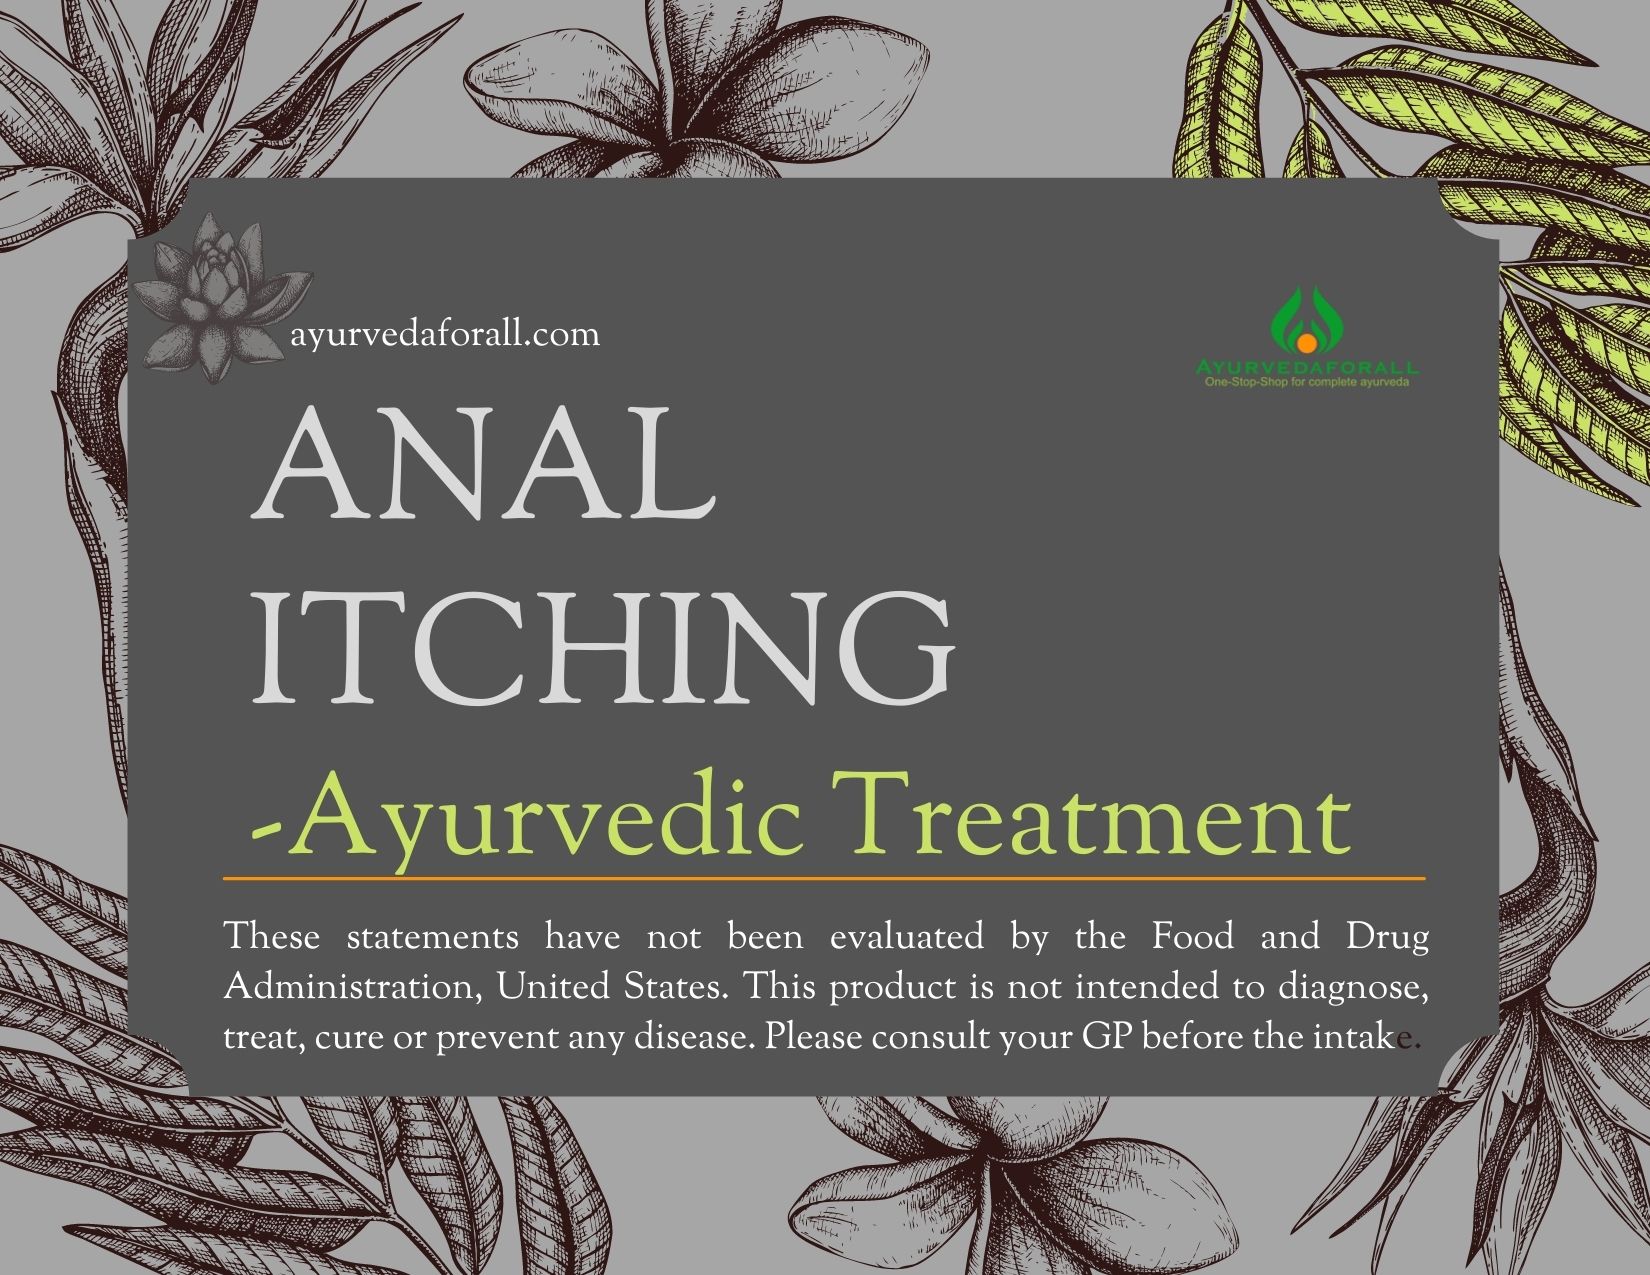 ANAL ITCHING